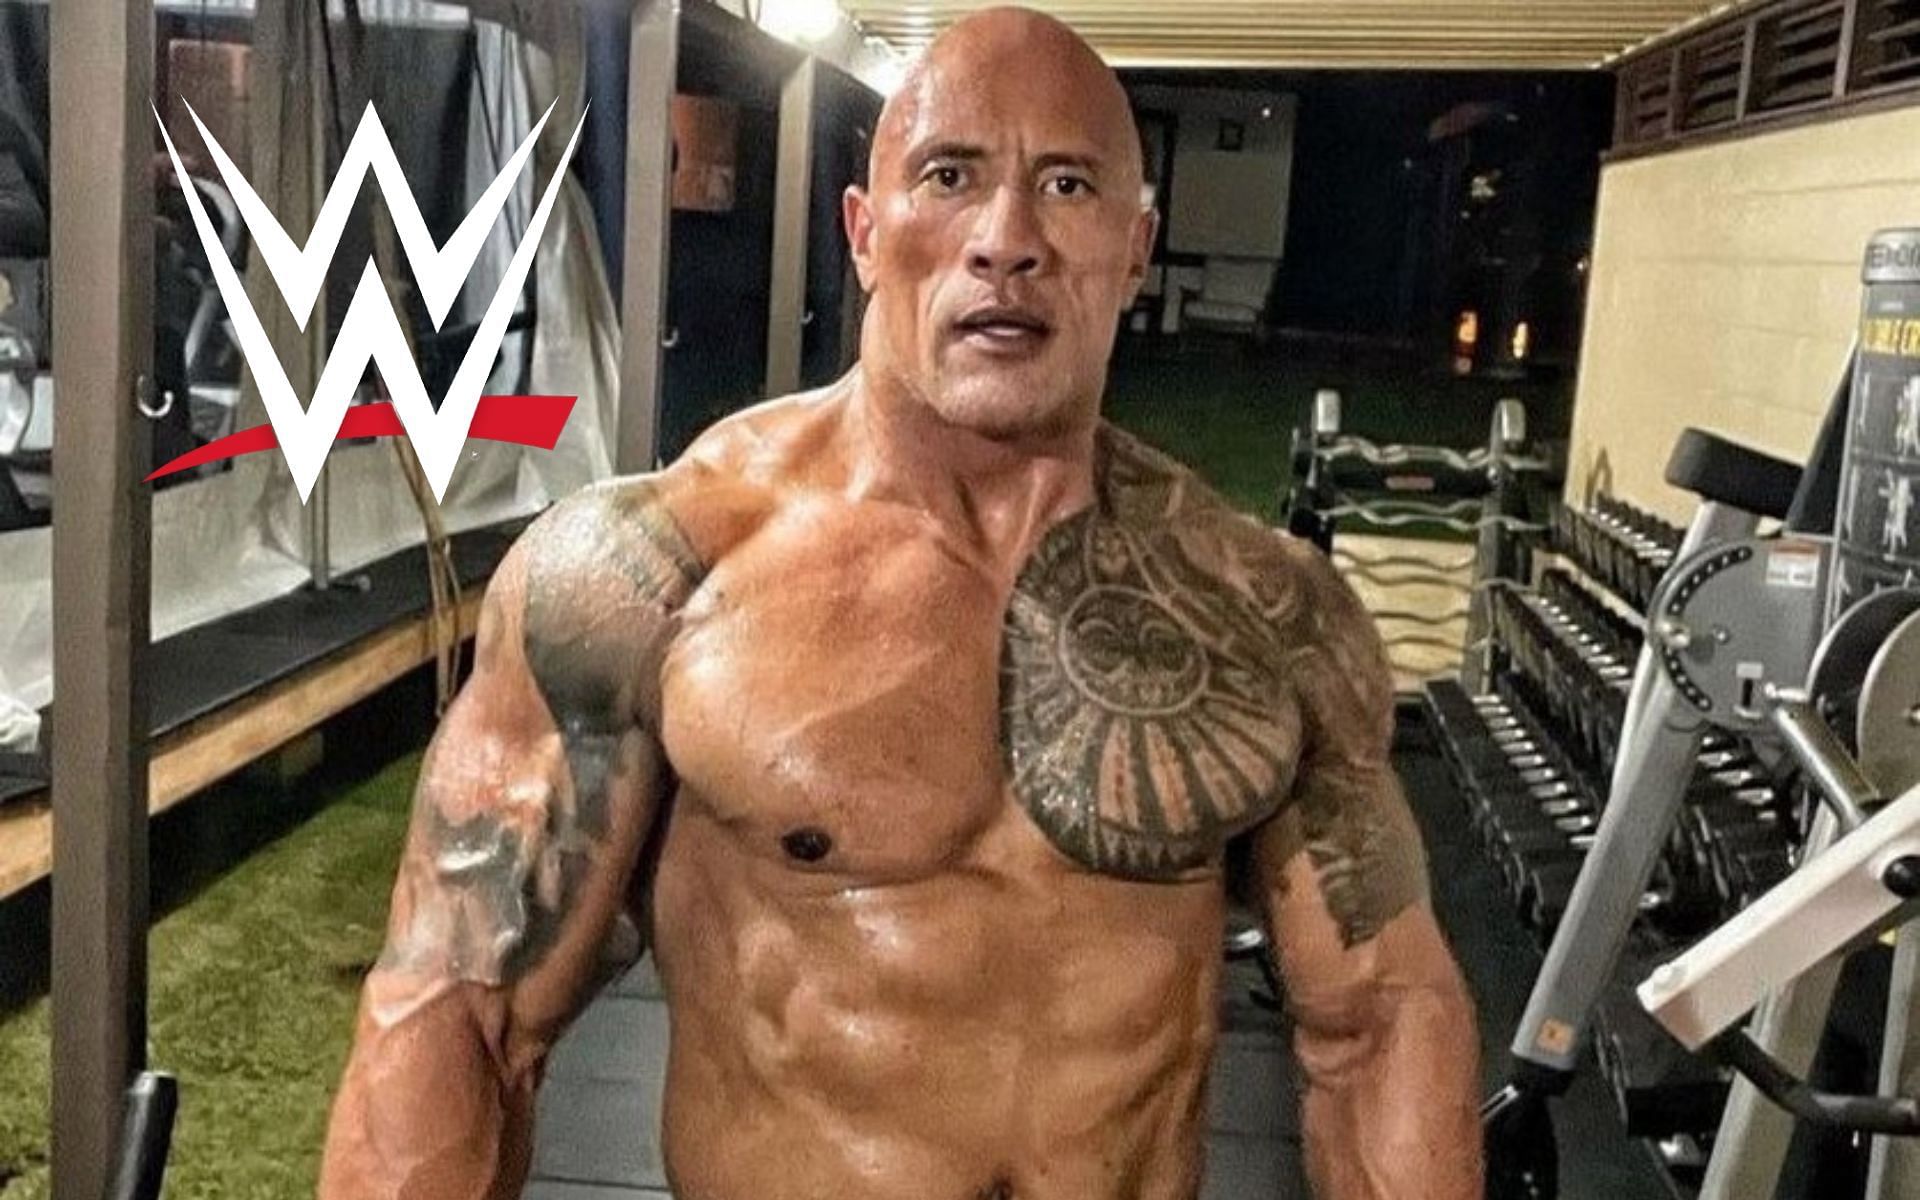 The Rock is currently on tour promoting his first DC film Black Adam